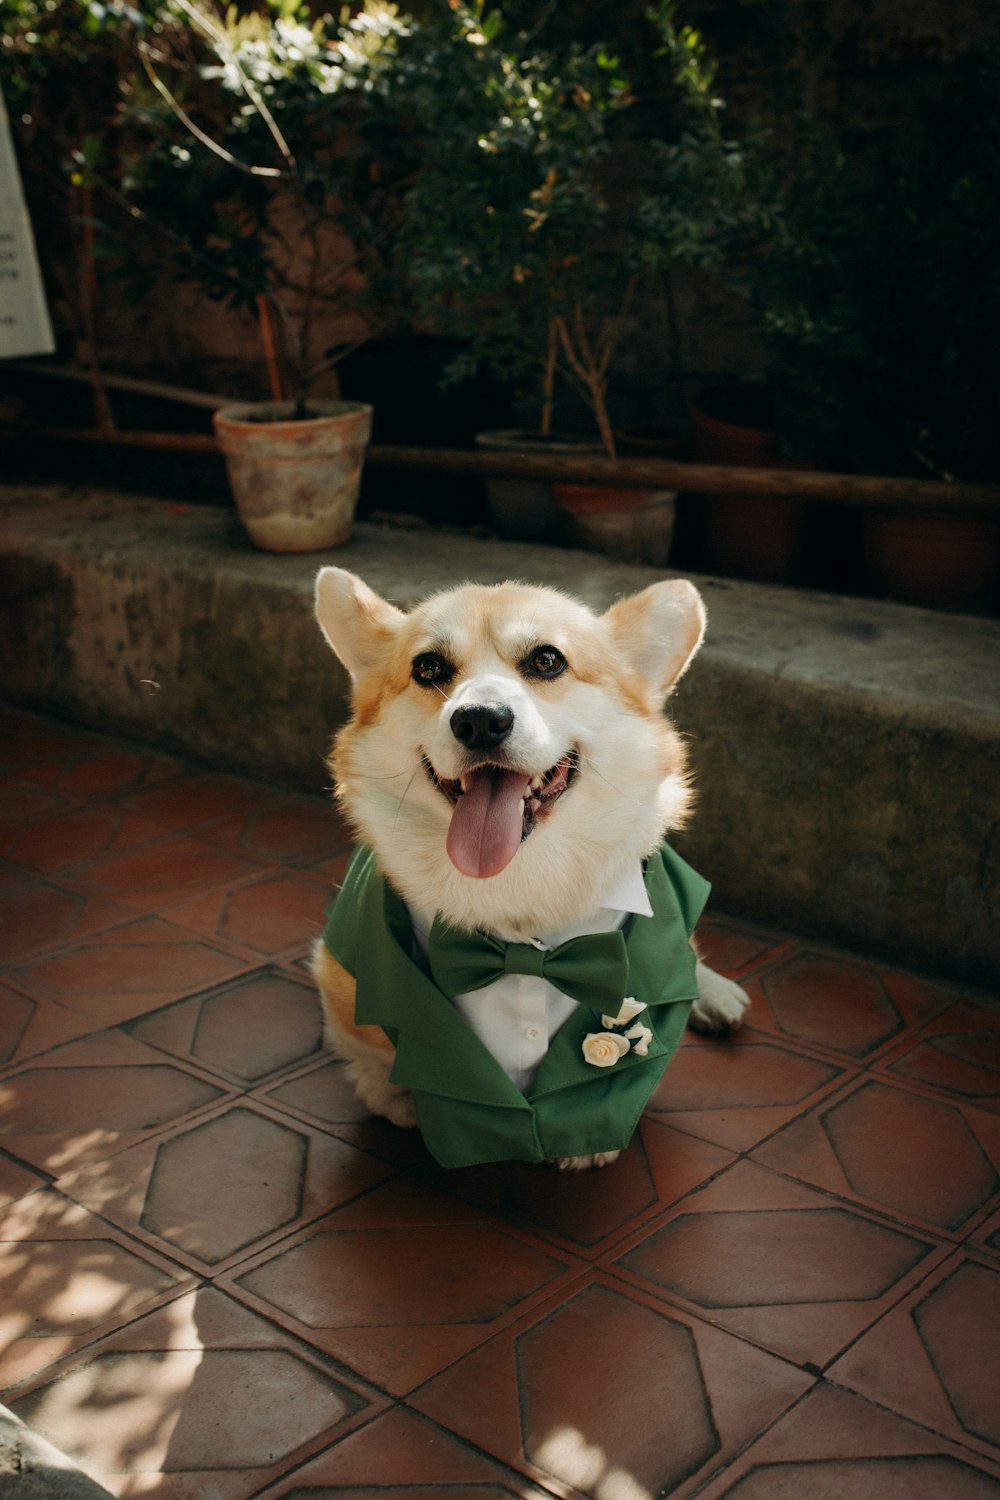 a small dog wearing a green shirt and tie